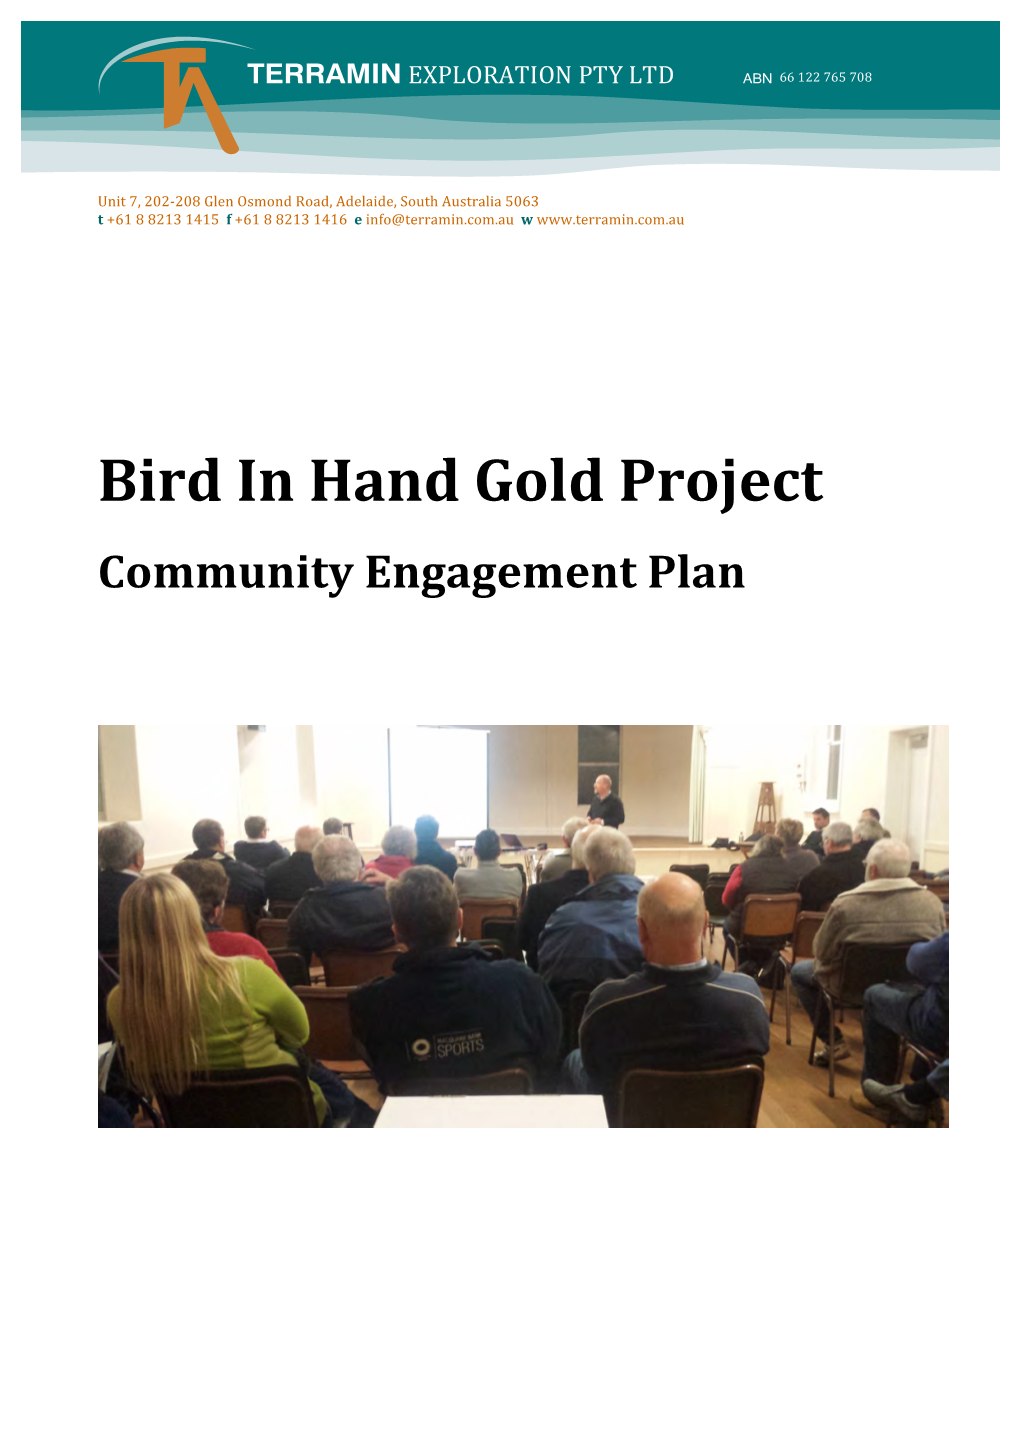 Bird in Hand Gold Project Community Engagement Plan